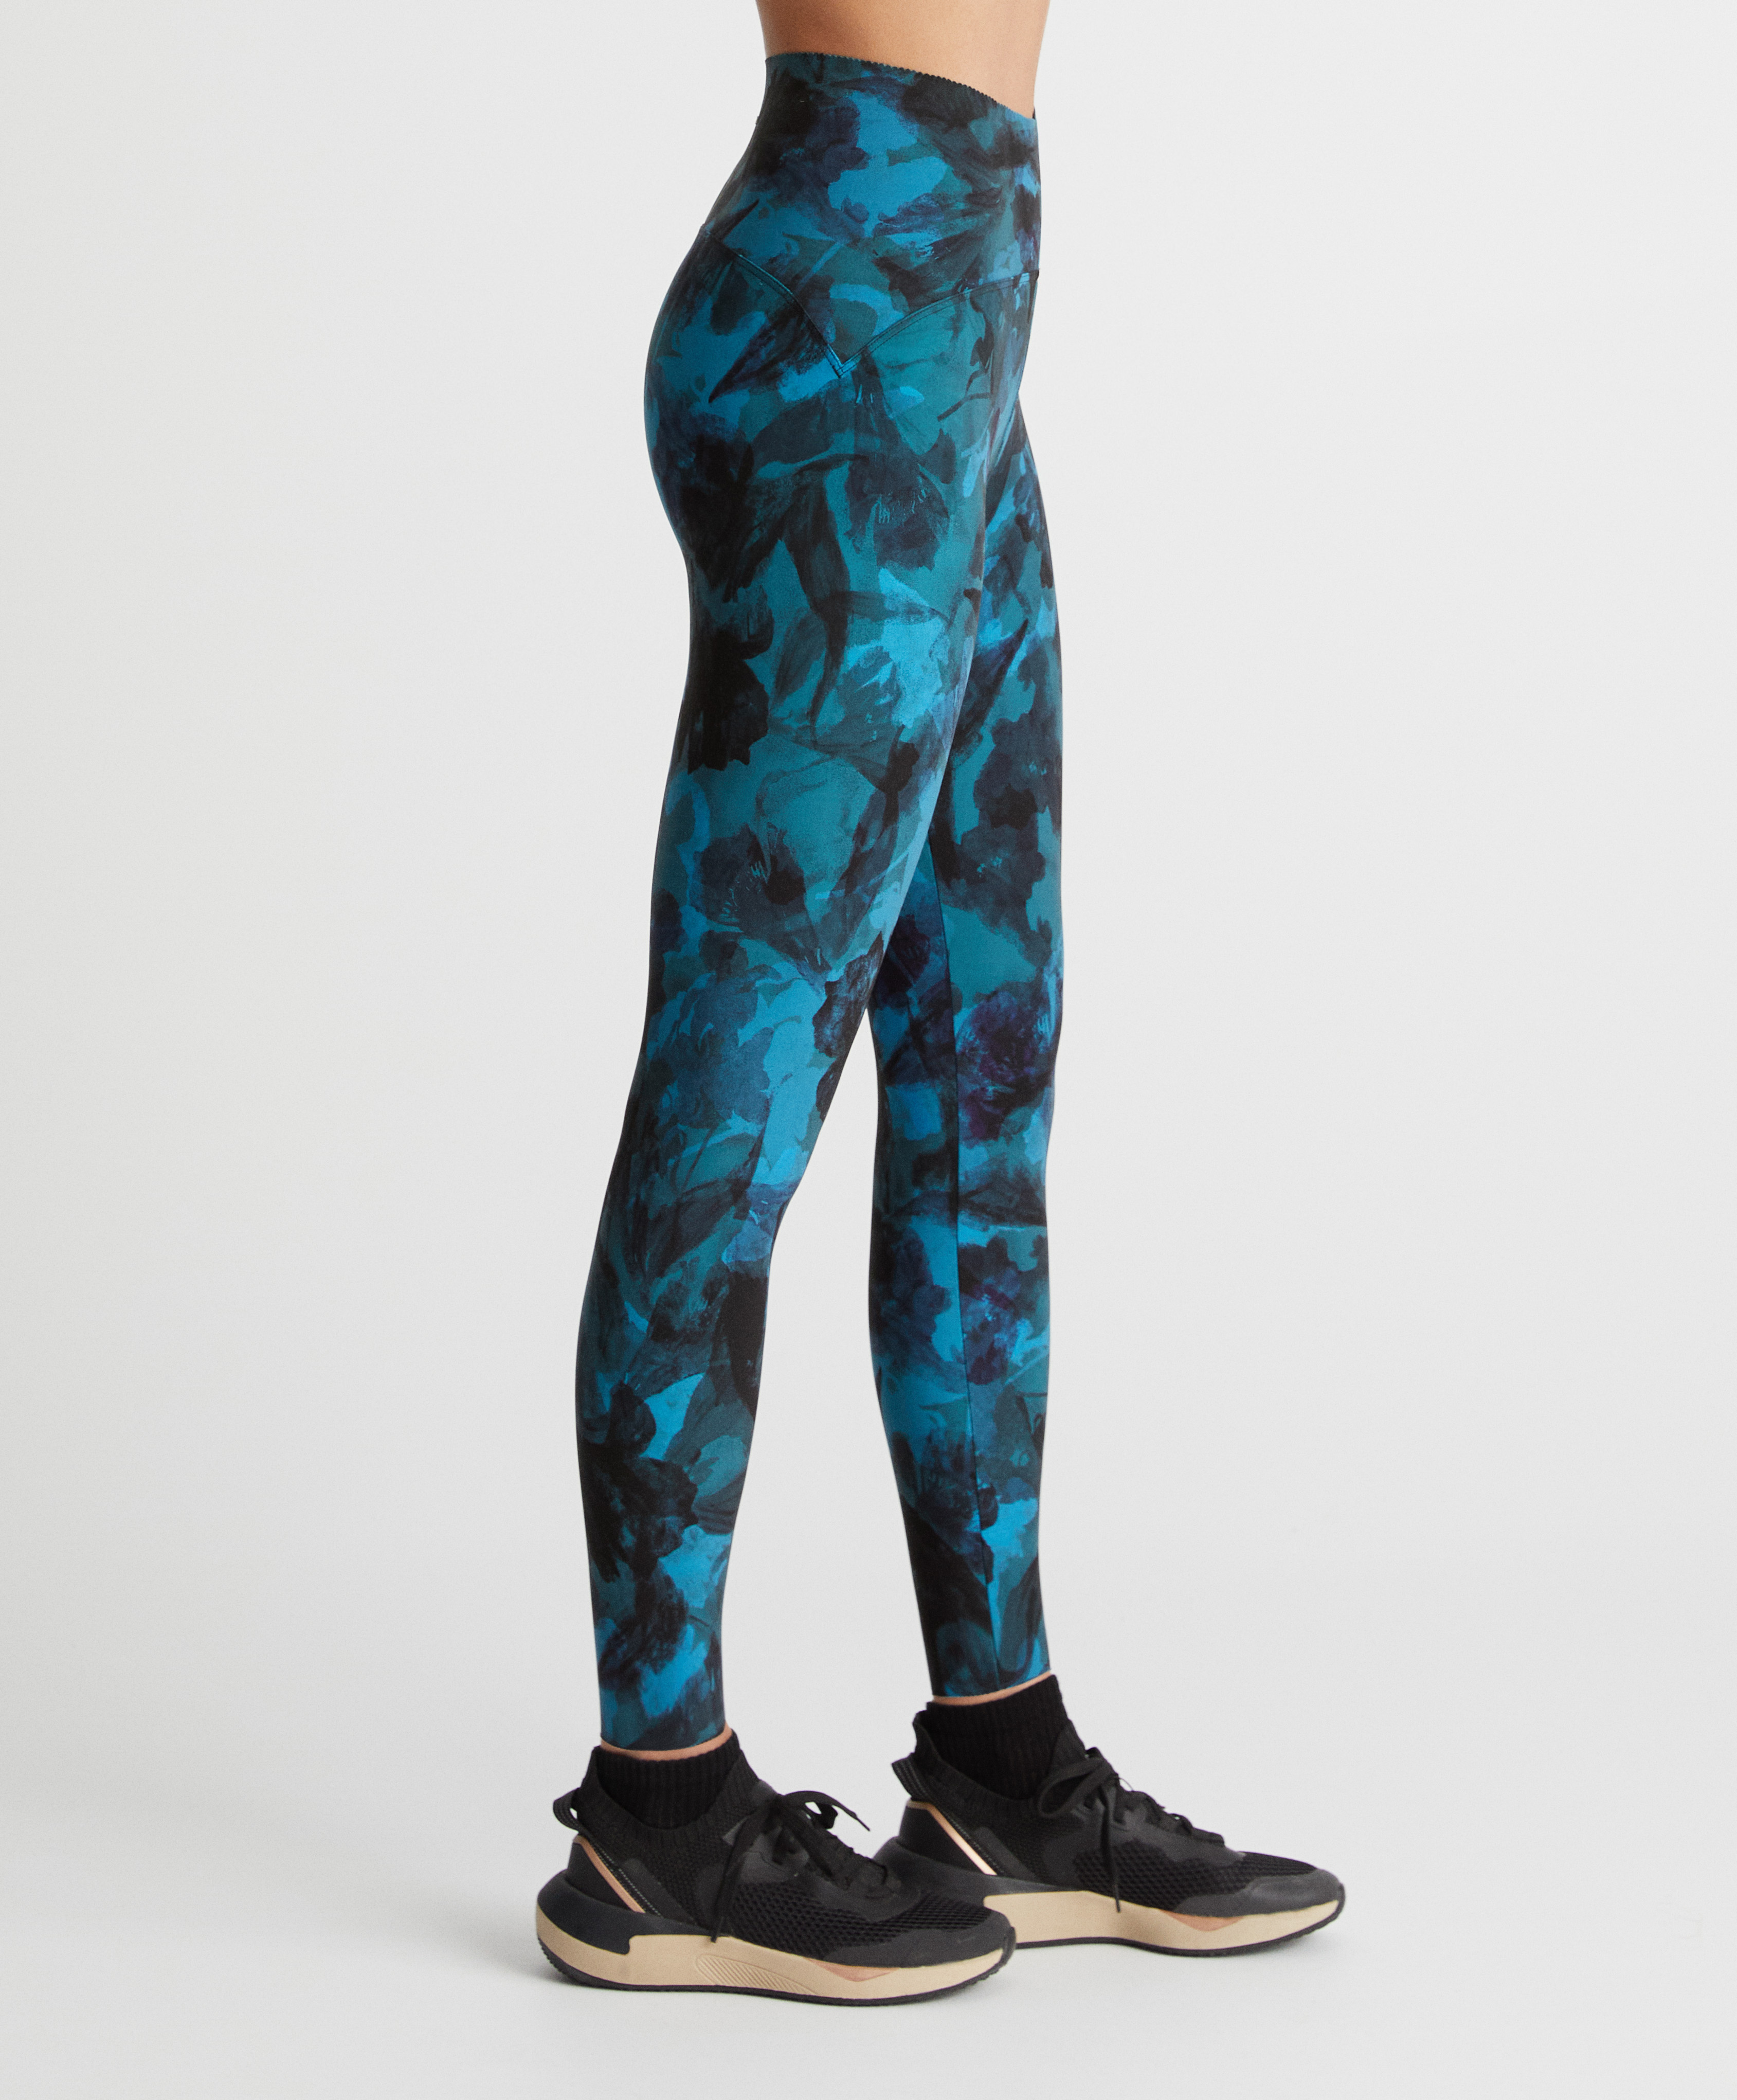 65cm compressive ankle-length leggings with print